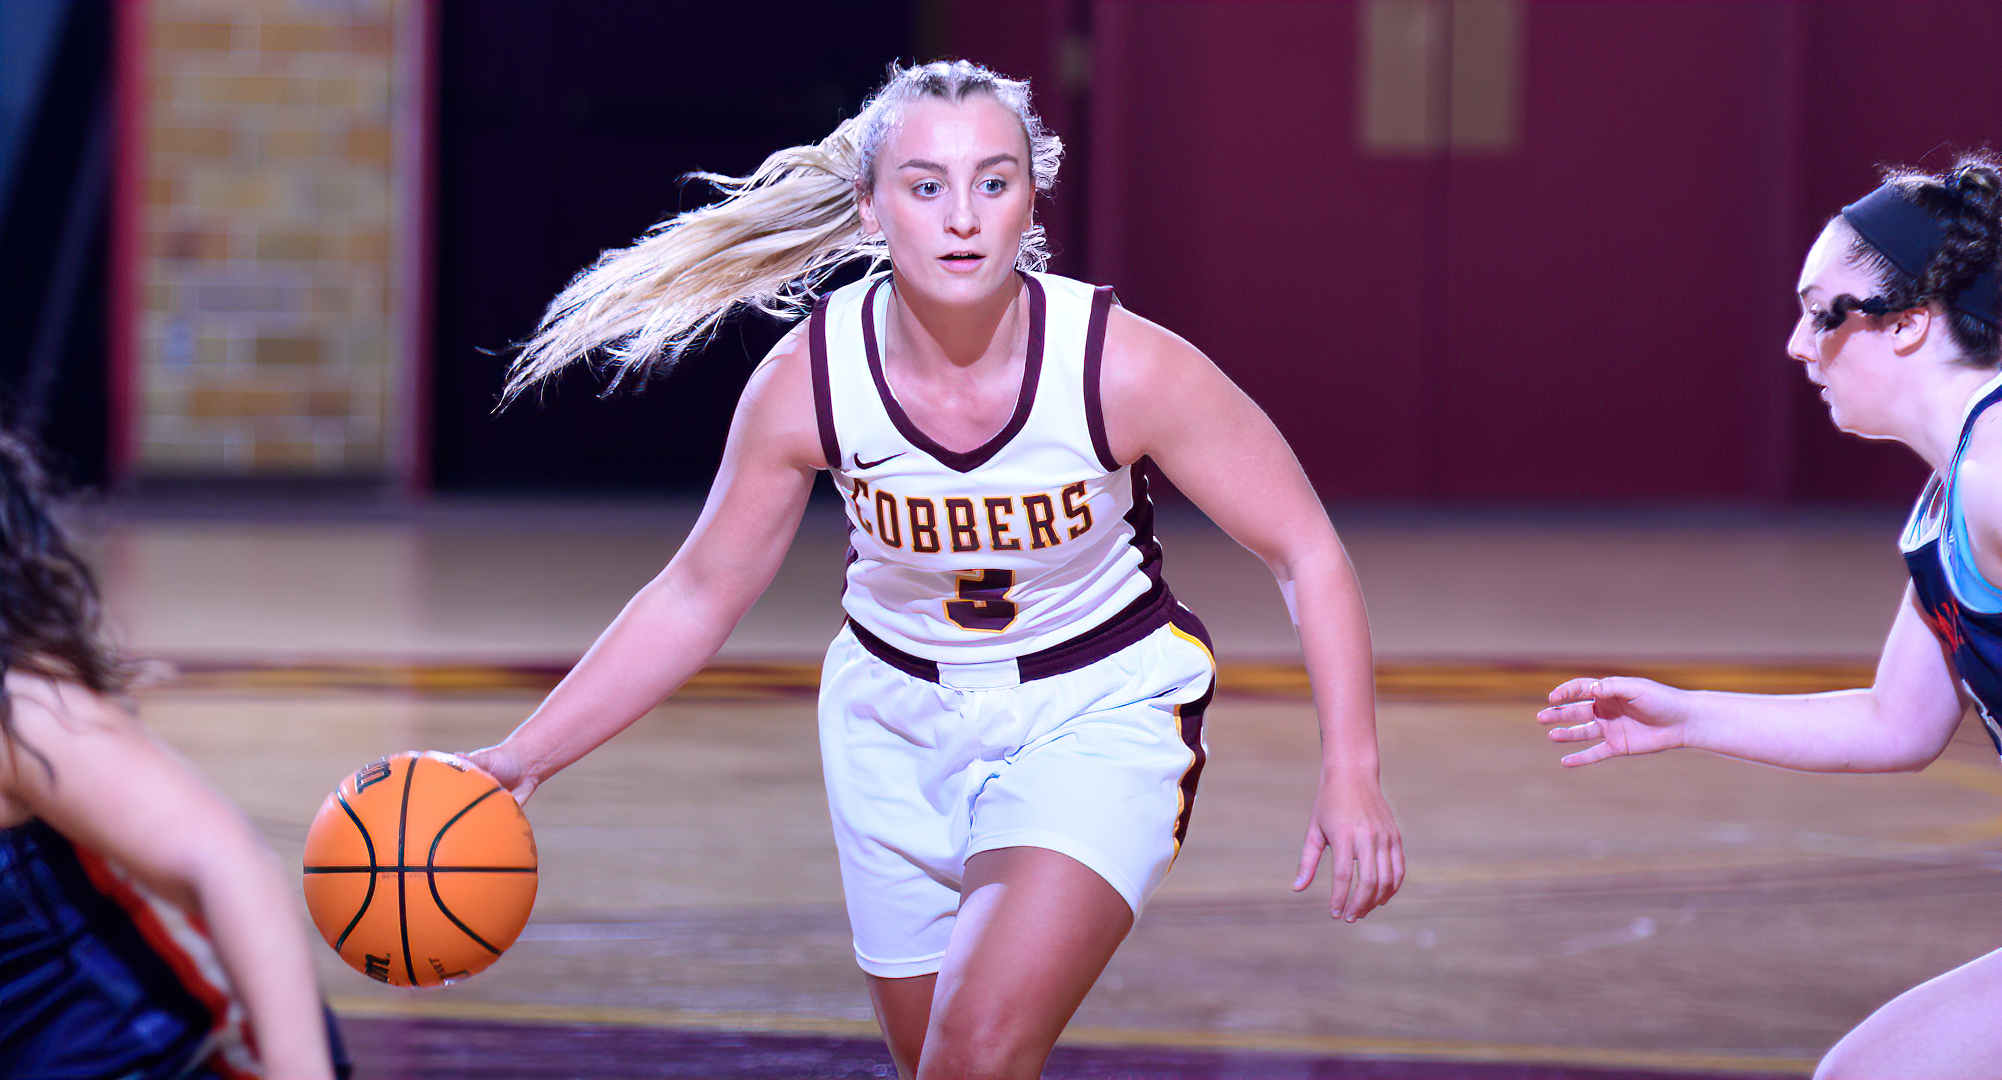 Senior guard Autumn Thompson went 8-for-13 from the floor and had a team-high 18 points in the Cobbers' game at St. Benedict.